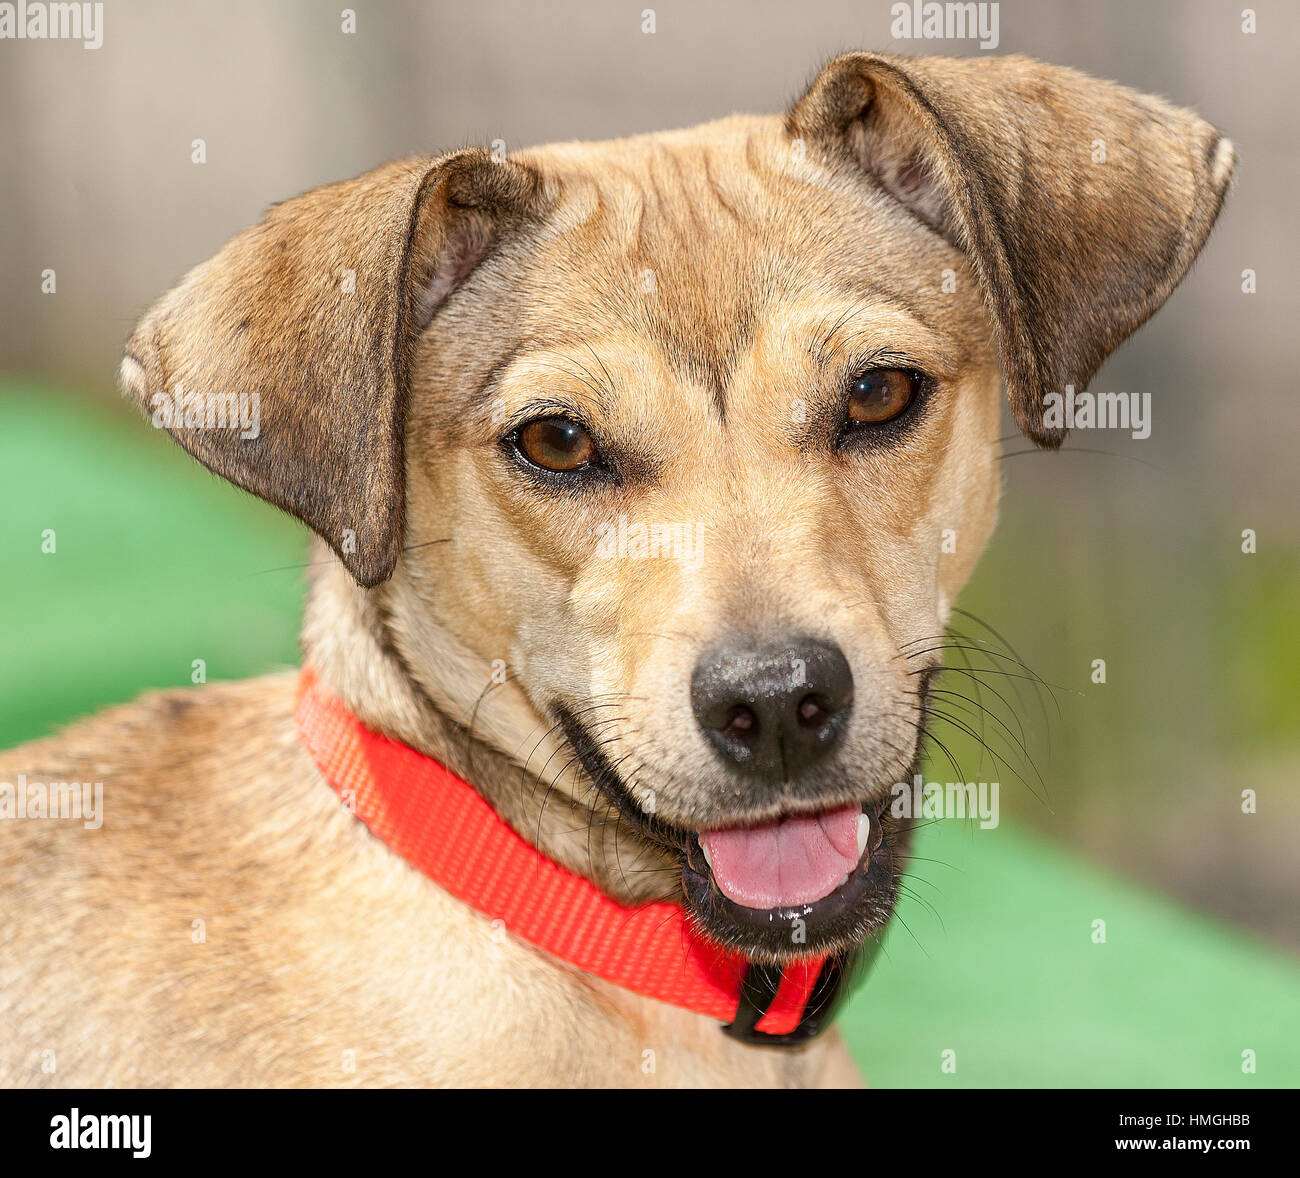 adorable brown medium dog close up headshot looking at camera with floppy ears mouth open smiling brown kind eyes with red collar and widow's peak Stock Photo